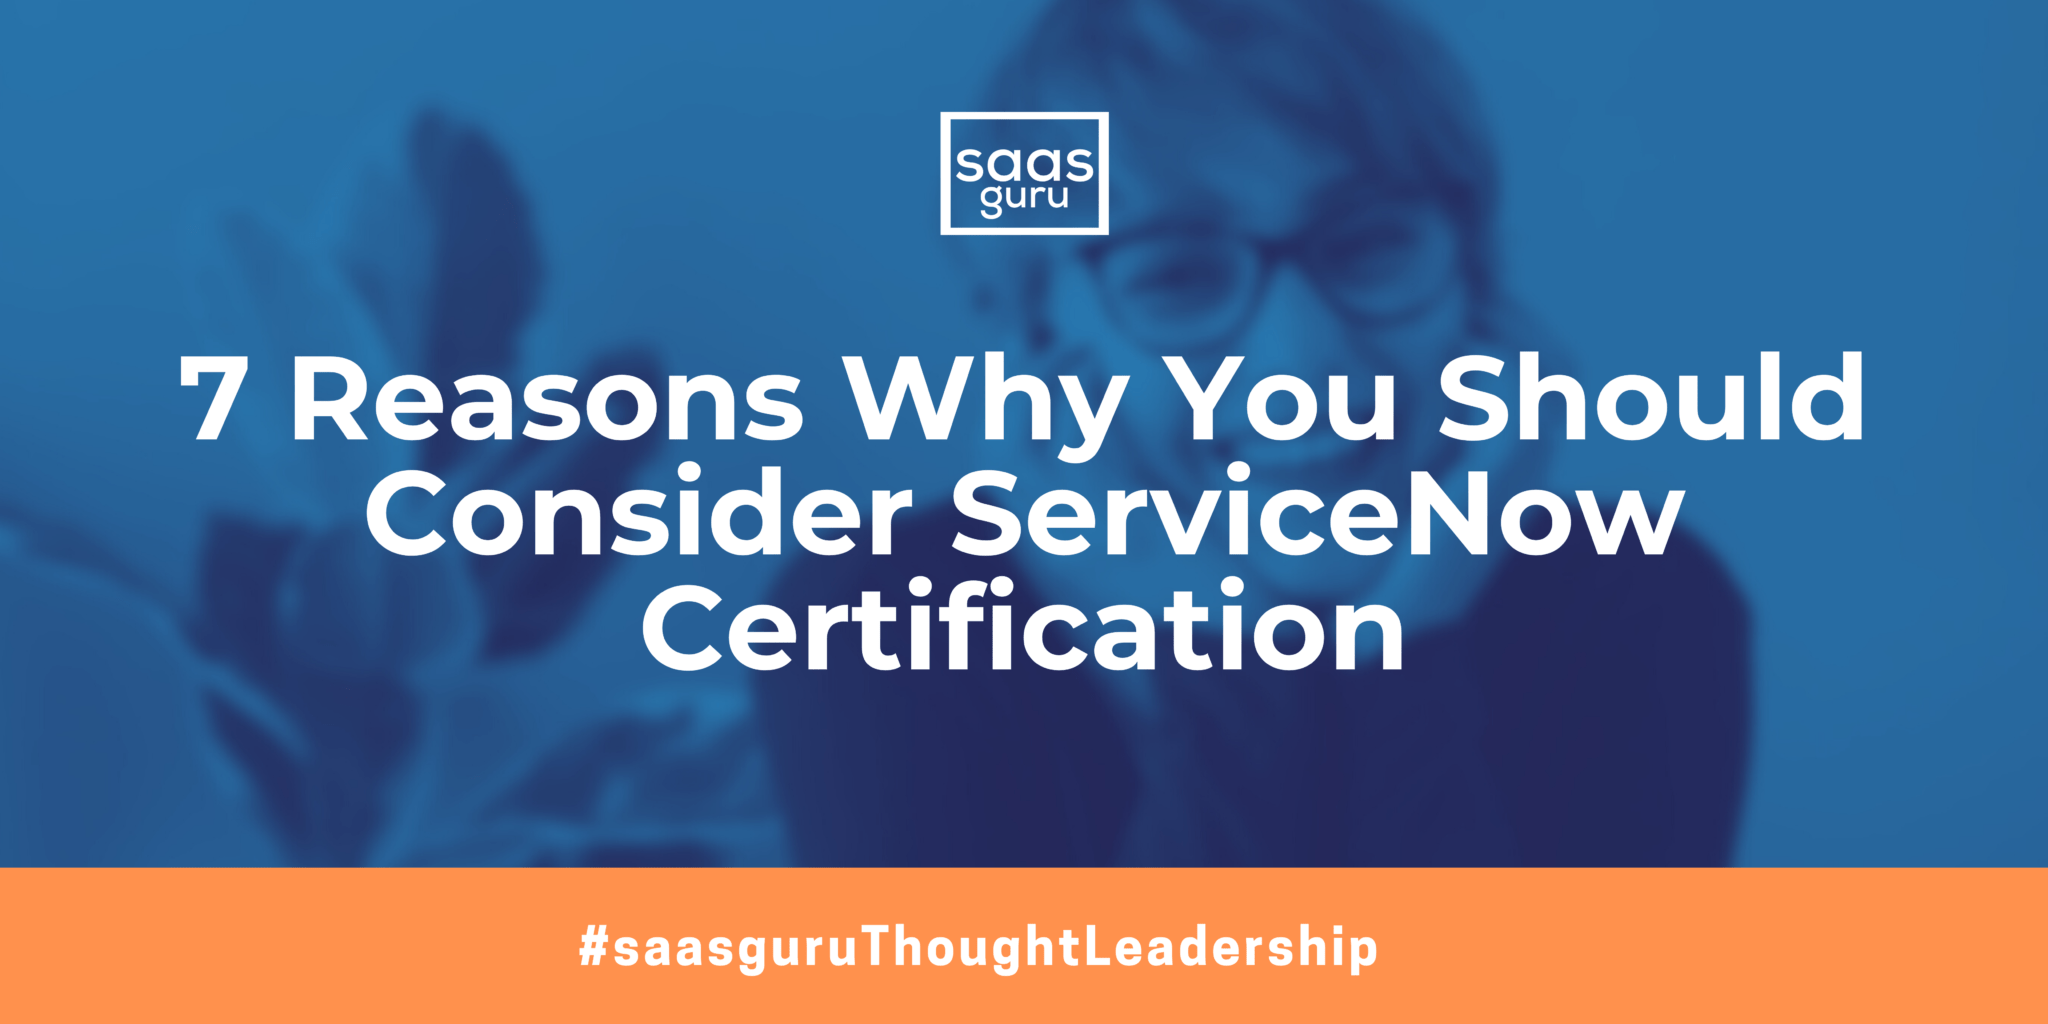 7 Reasons Why You Should Consider ServiceNow Certification